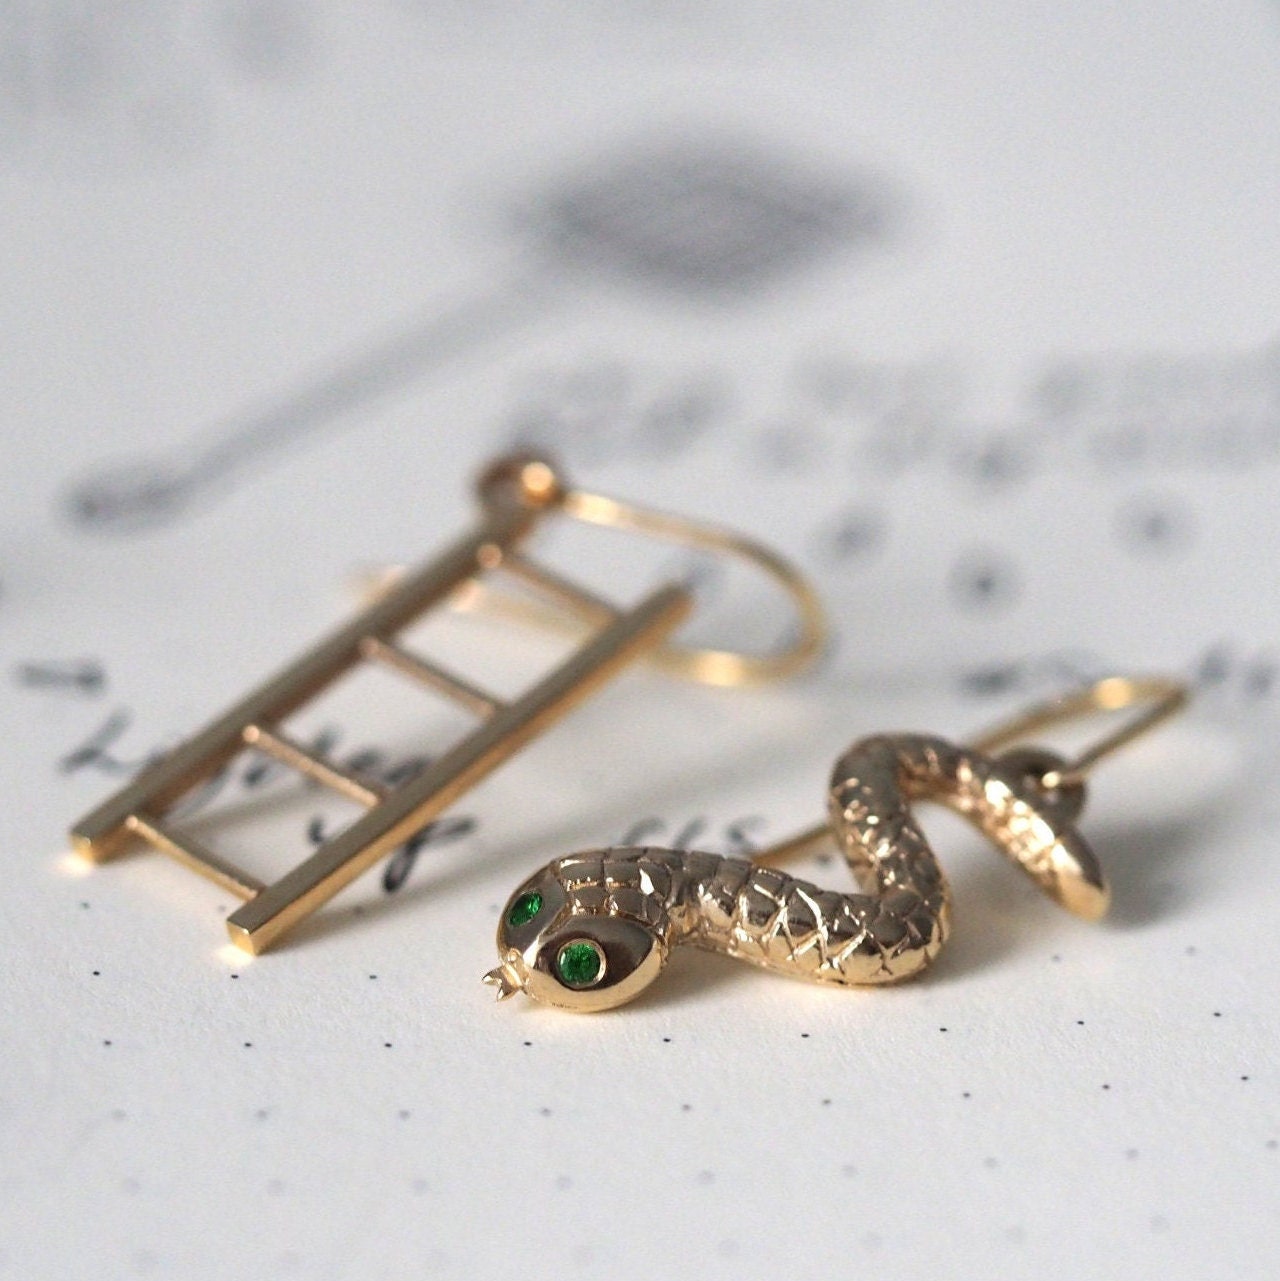 Snake and Ladder Earrings -  Recycled Sterling Silver and Tsavorite Garnets